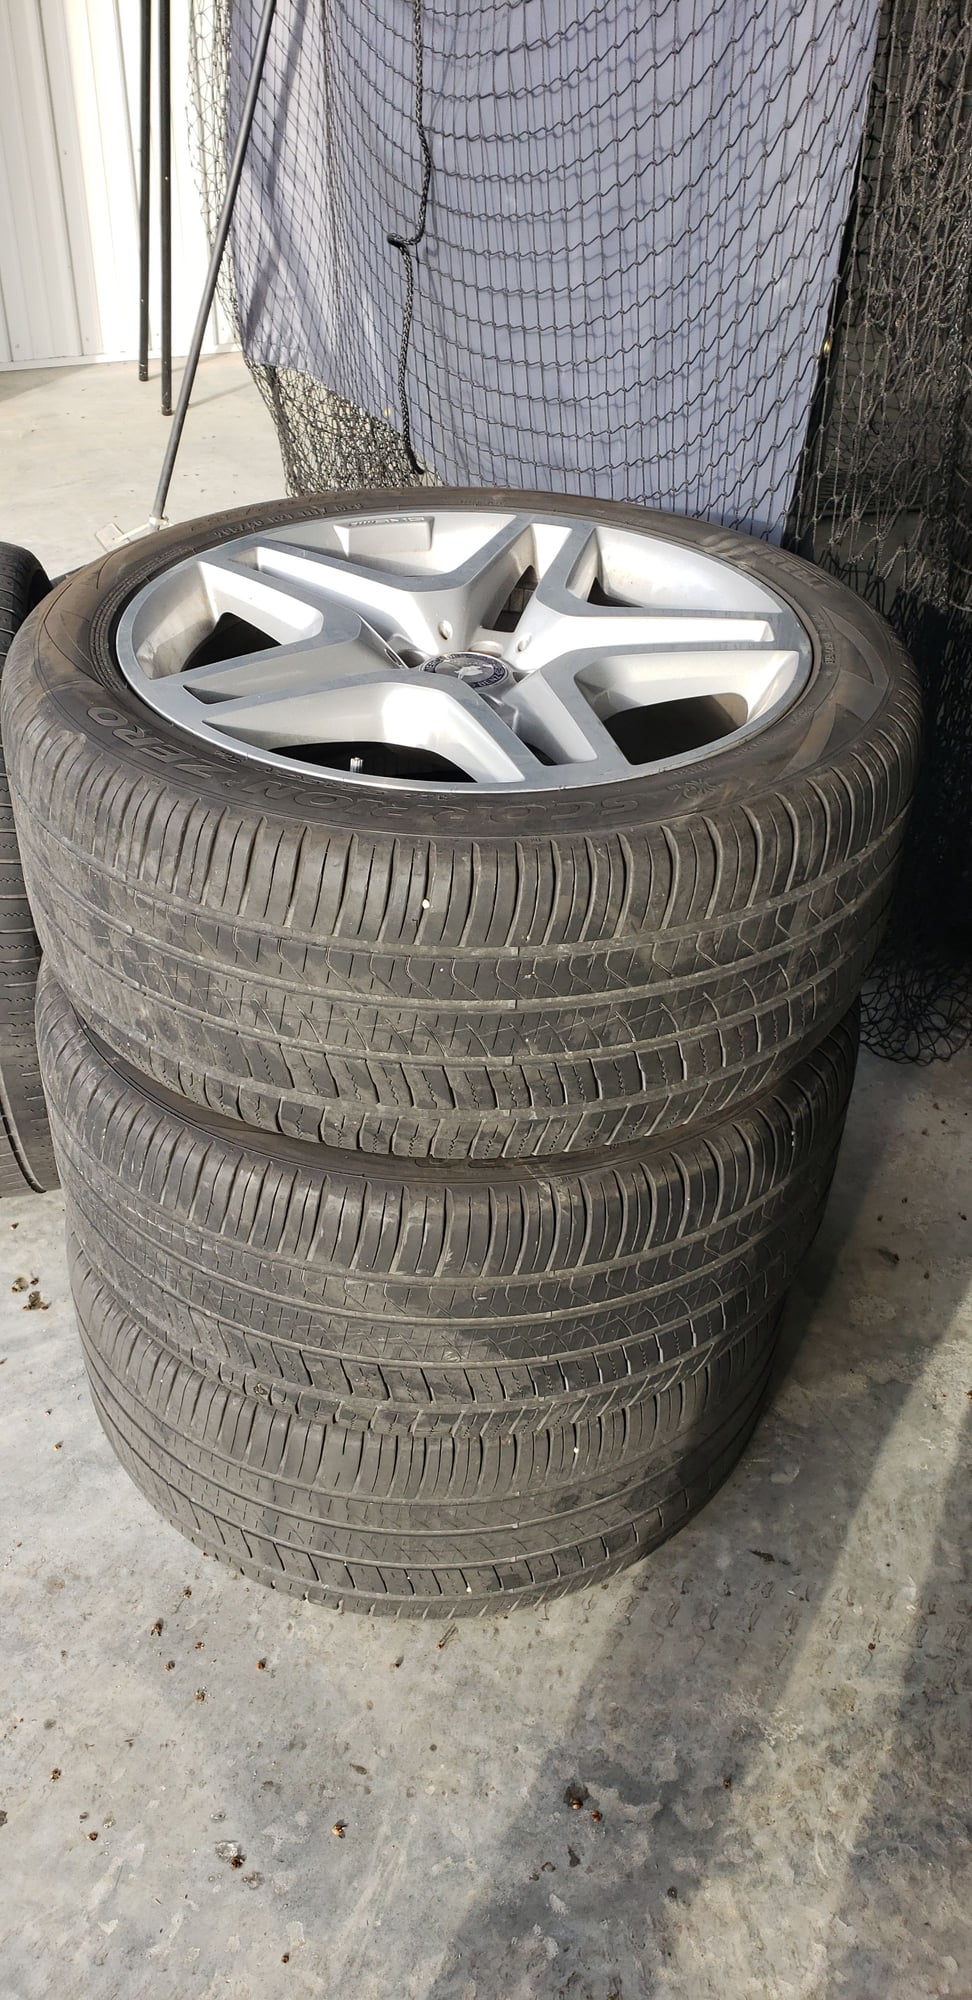 Wheels and Tires/Axles - AMG wheels and tires for sale great condition - Used - 2013 to 2018 Mercedes-Benz GL550 - Winona, MN 55987, United States